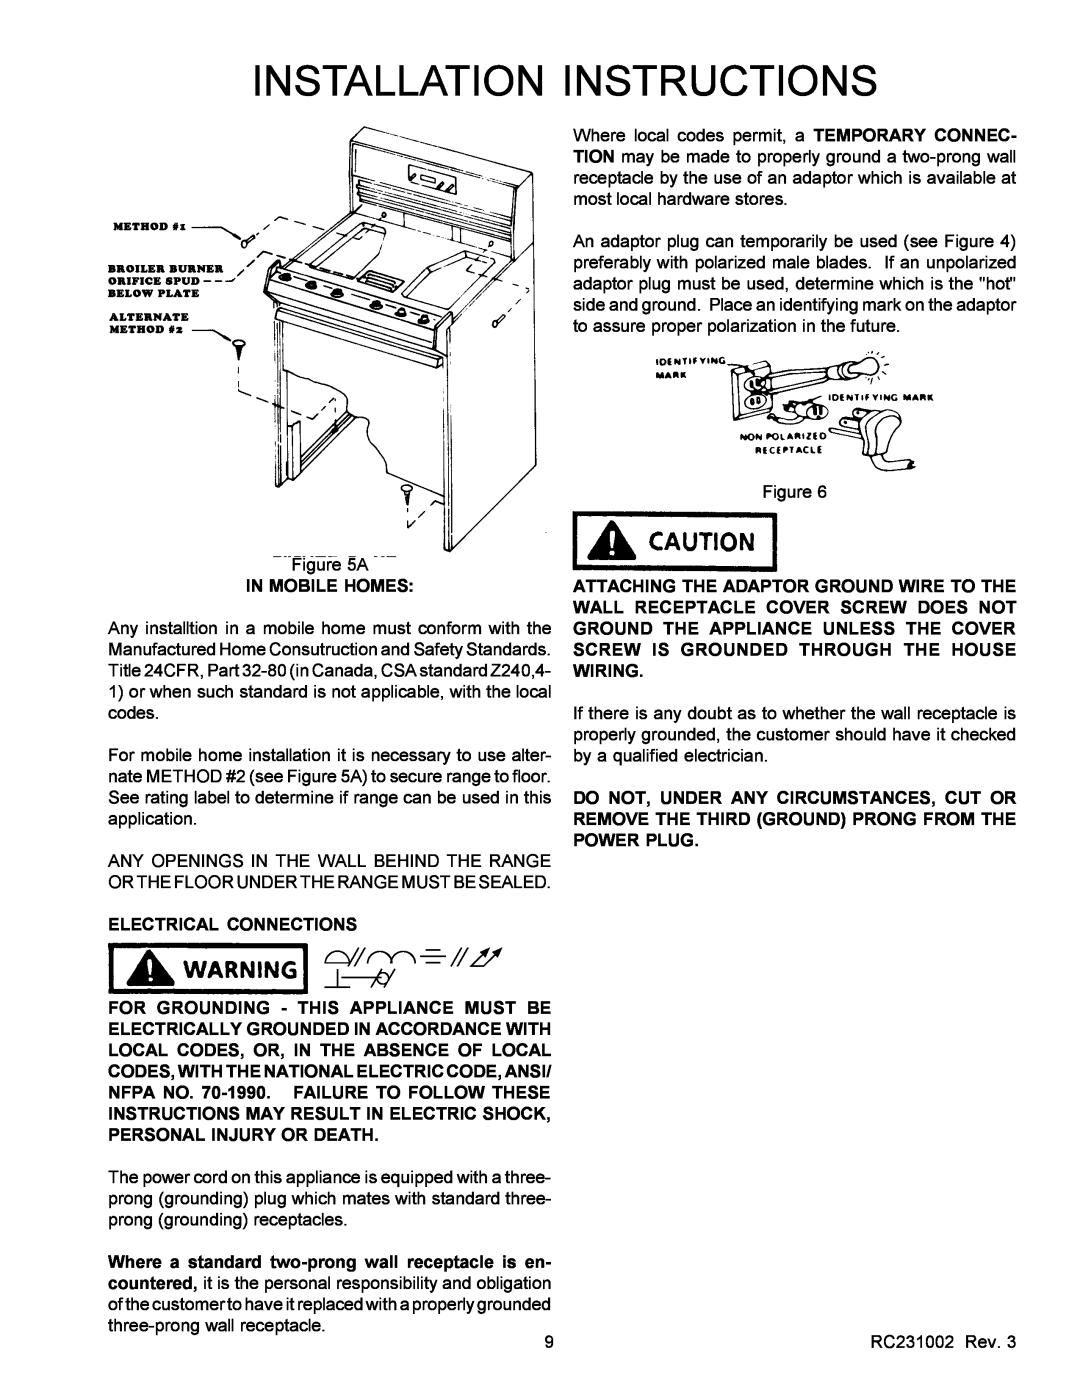 Amana RSS, RST In Mobile Homes, Electrical Connections, For Grounding - This Appliance Must Be, Installation Instructions 